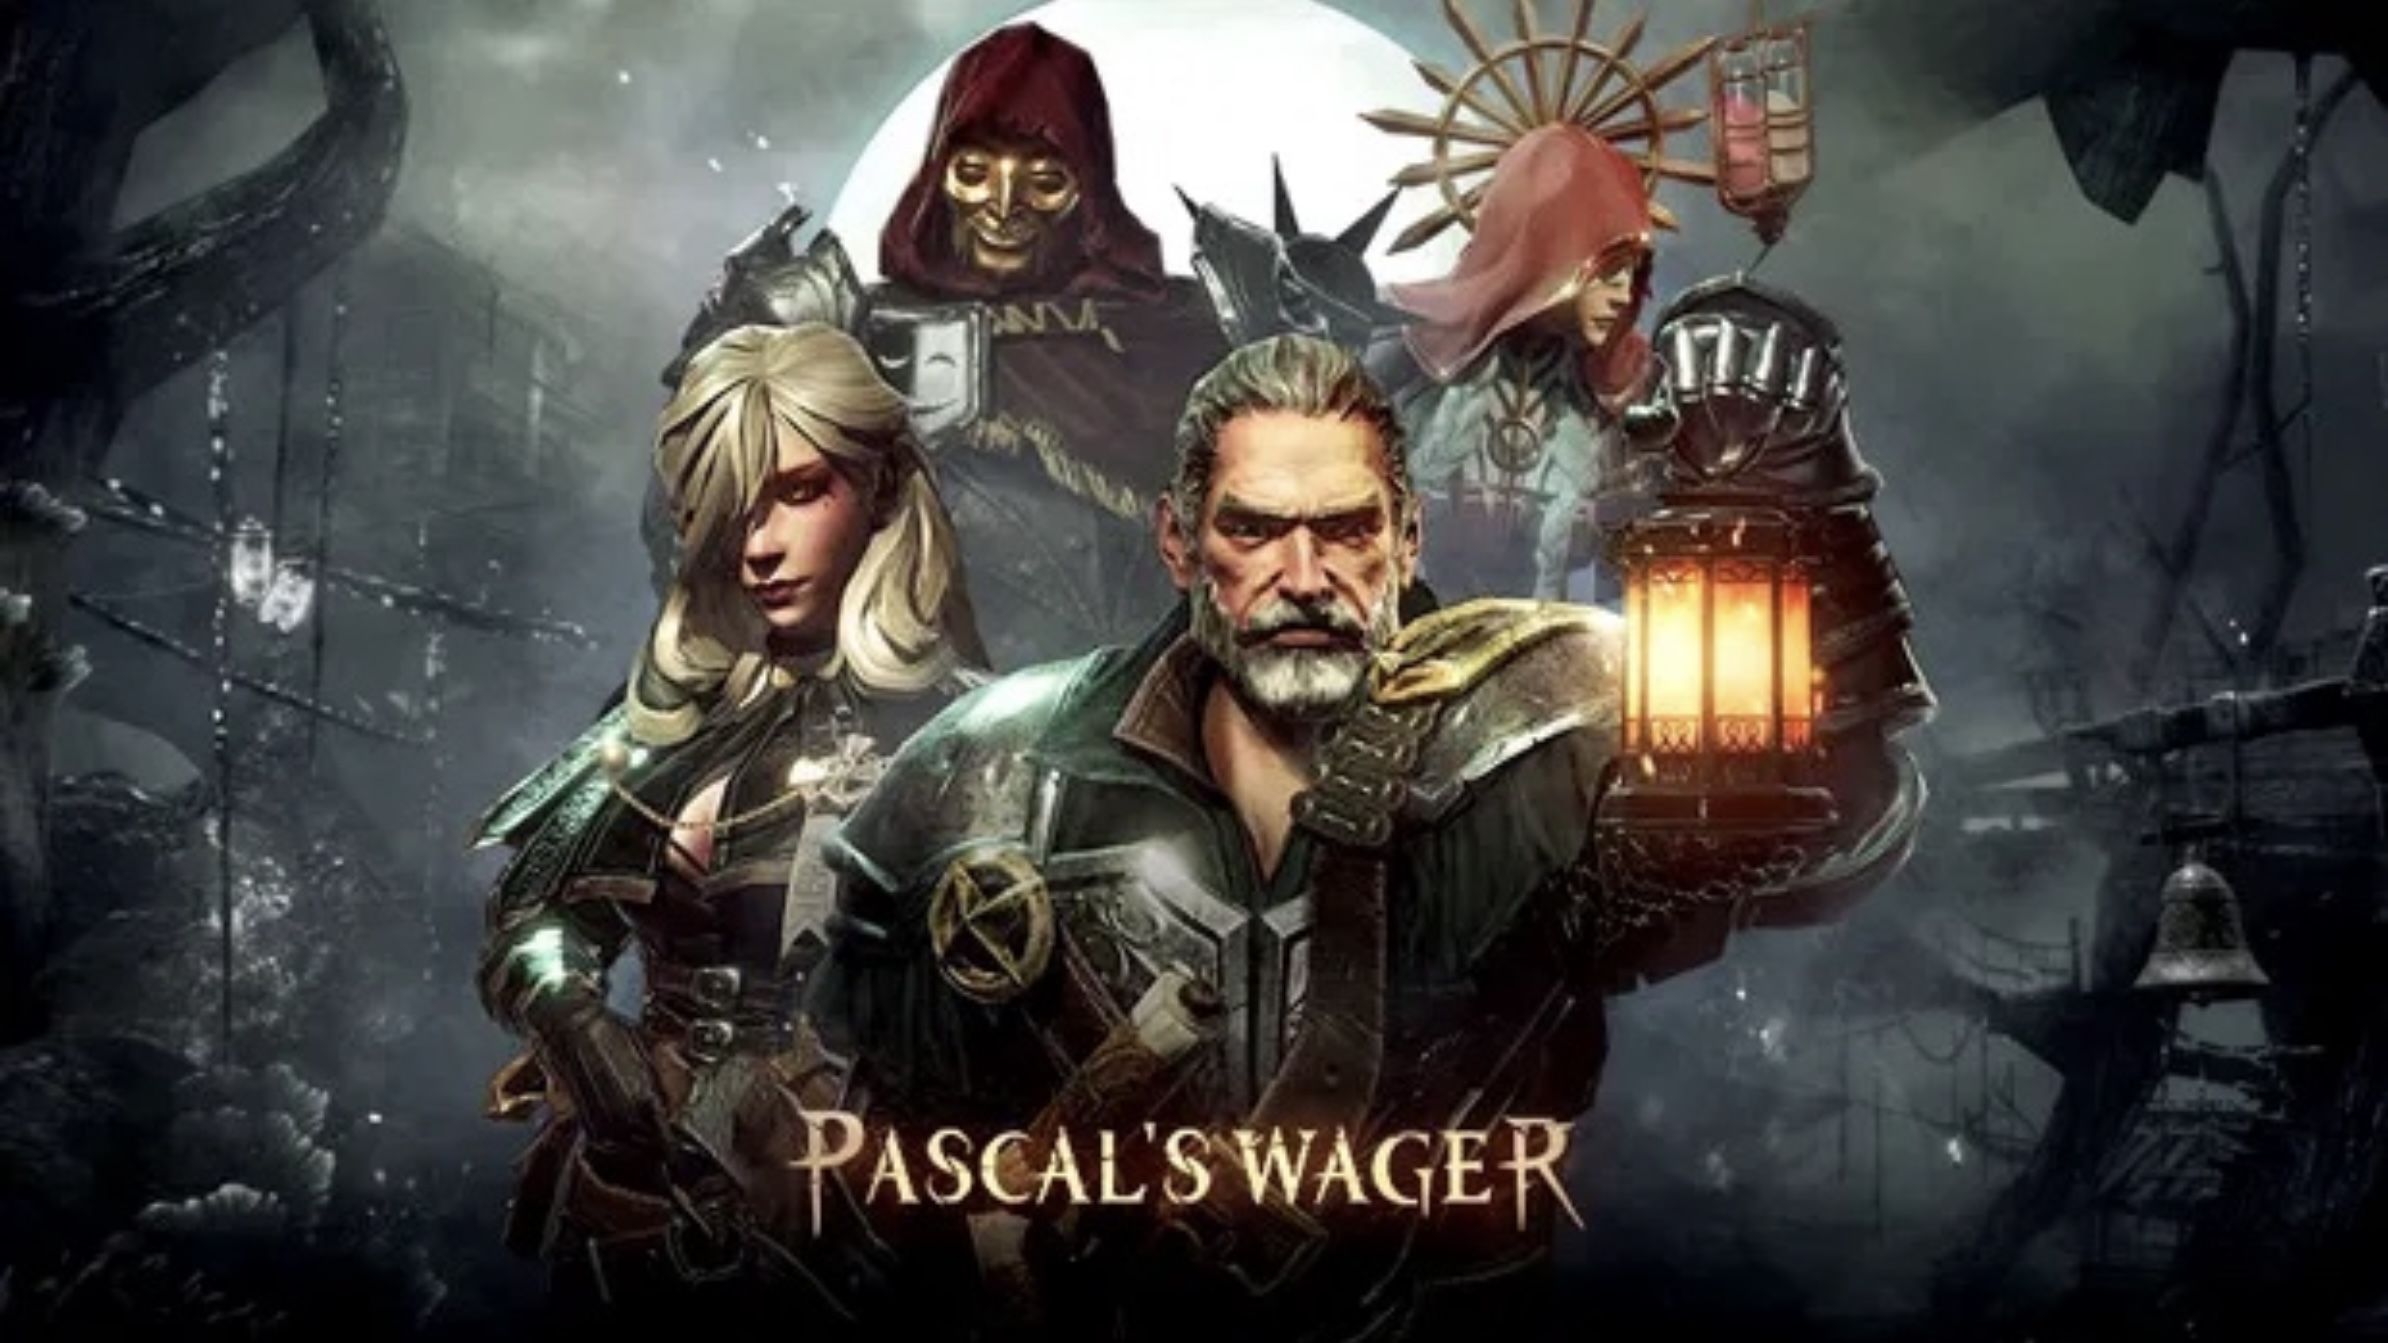 Pascal s wager кэш. Pascal's Wager: Definitive Edition. Pascal Wager Android. Pascal's Wager на ПК. Pascal's Wager Definitive Edition Нинтендо.